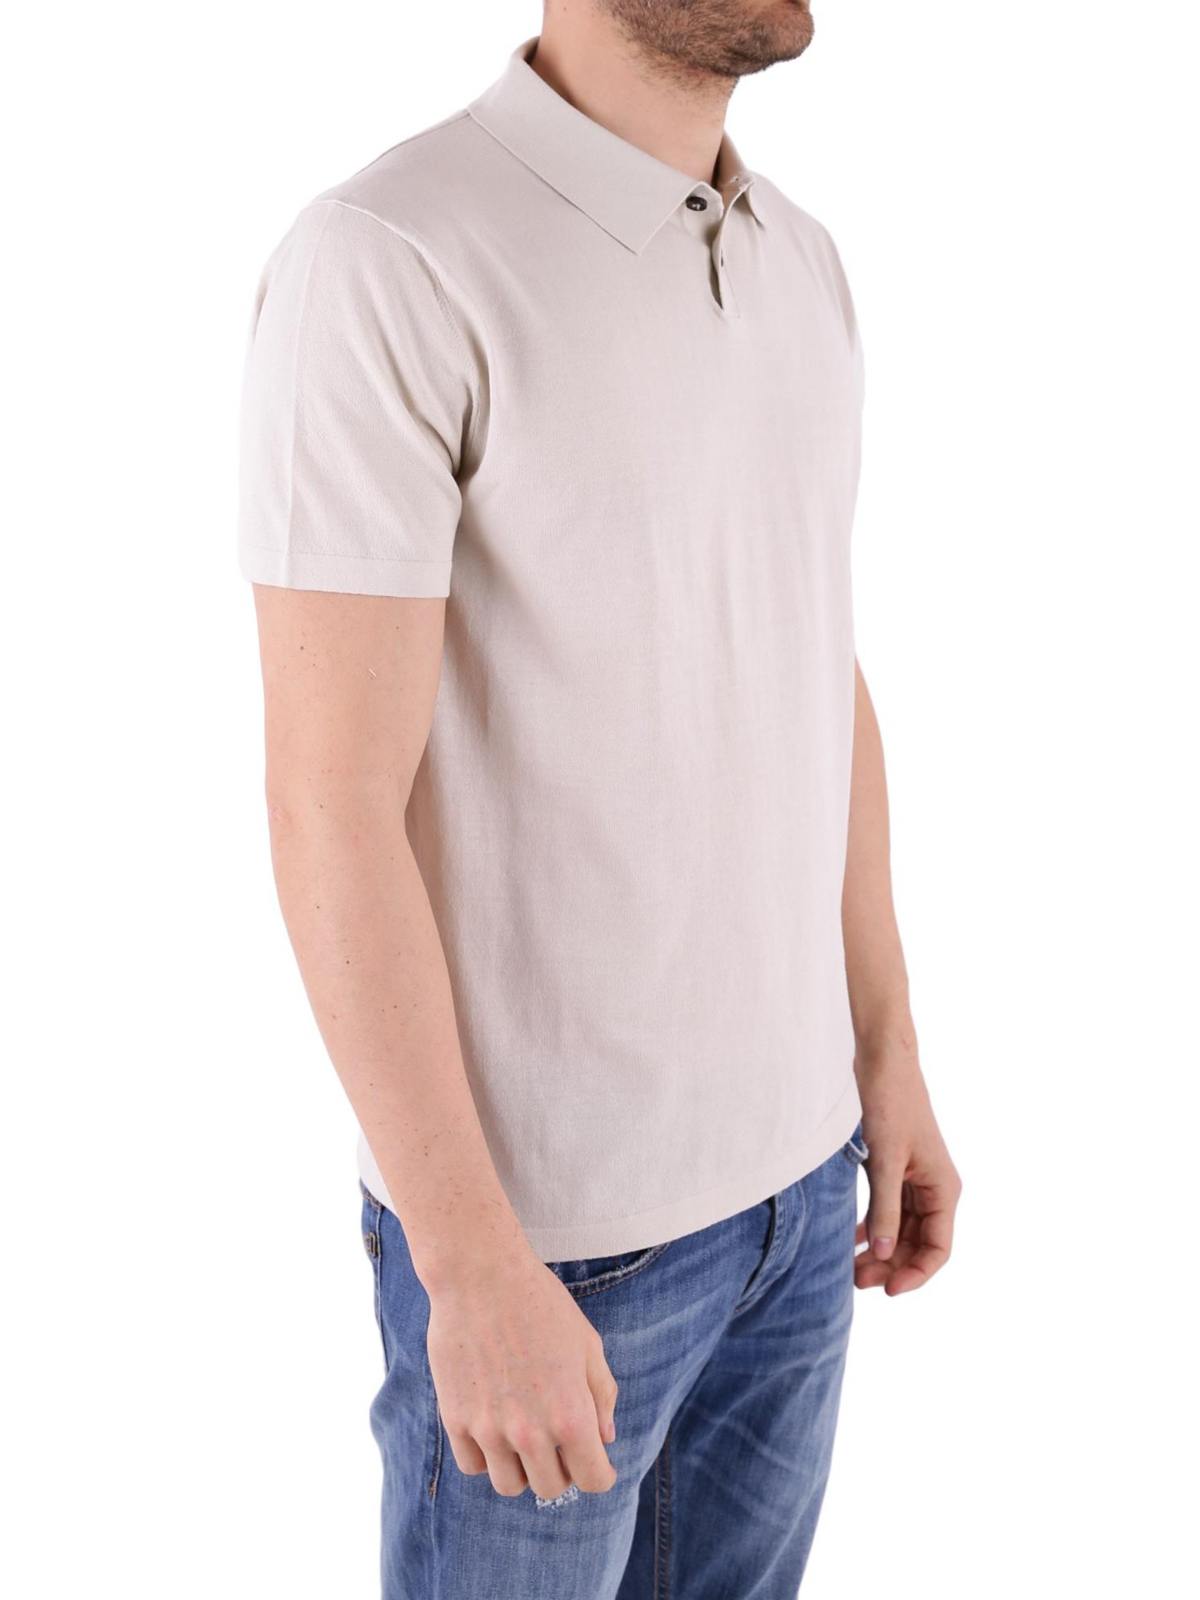 Cotton jersey polo shirt with Web